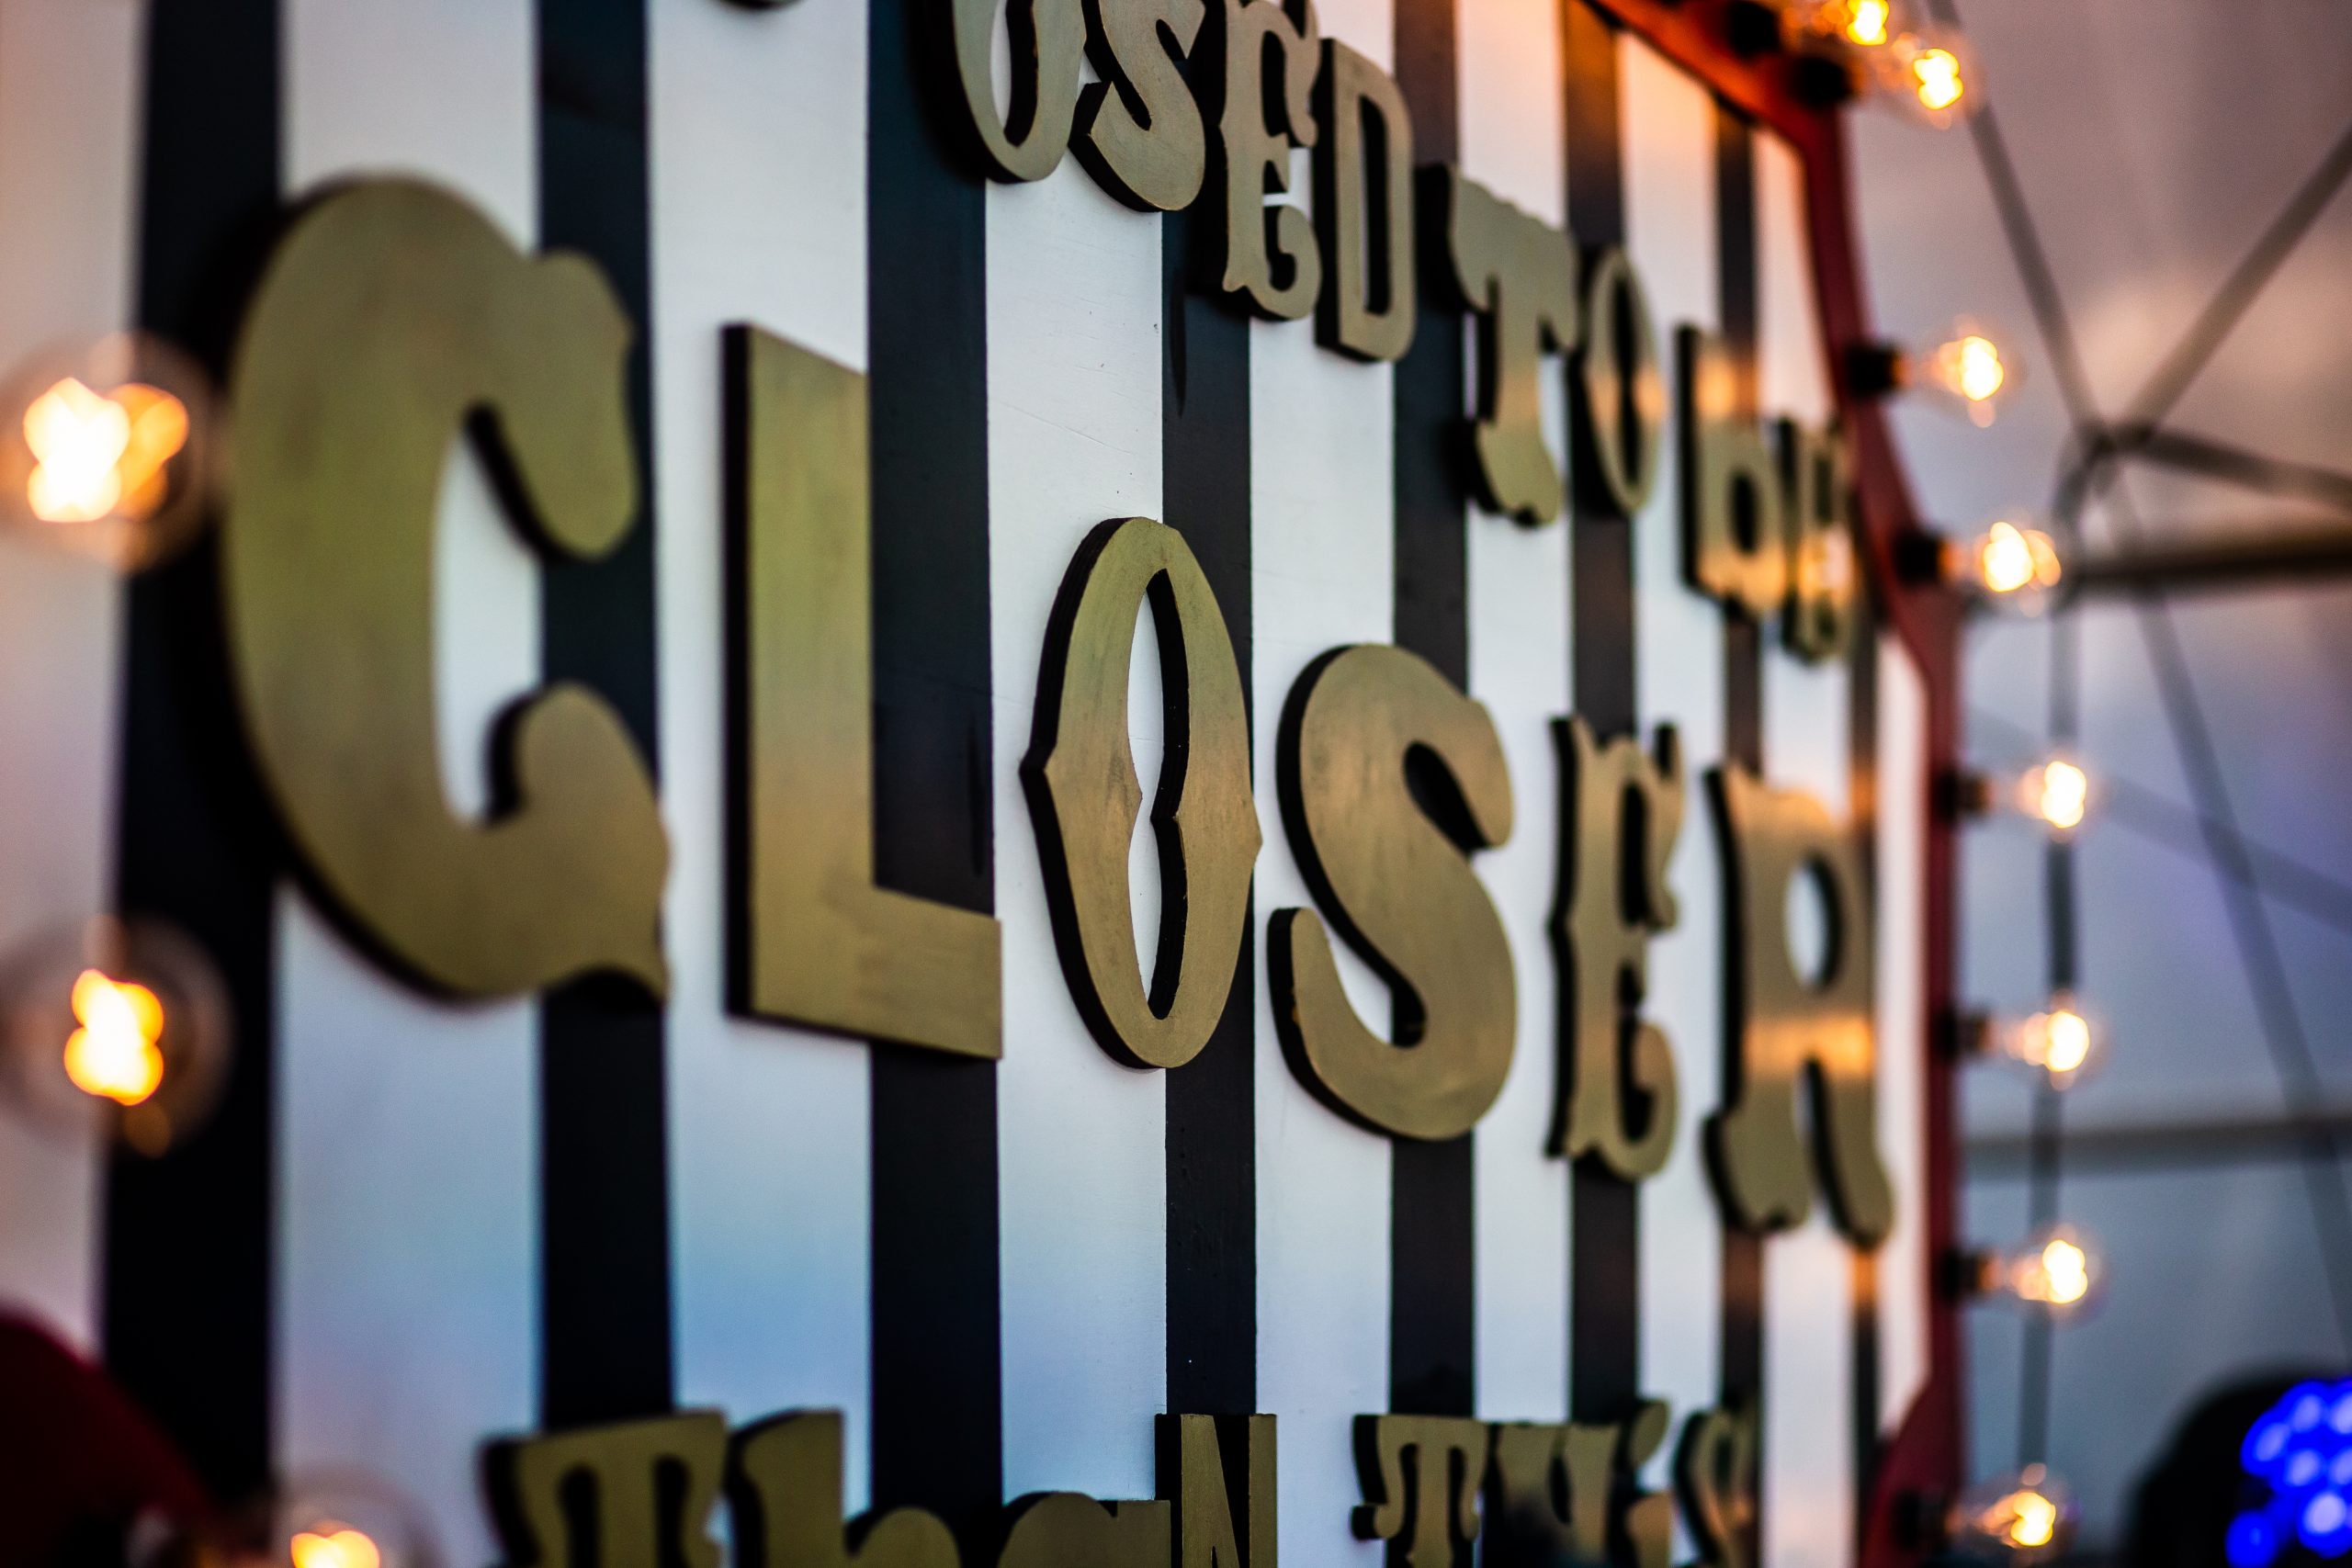 A sign of the show title on black and white striped background, as part of the set